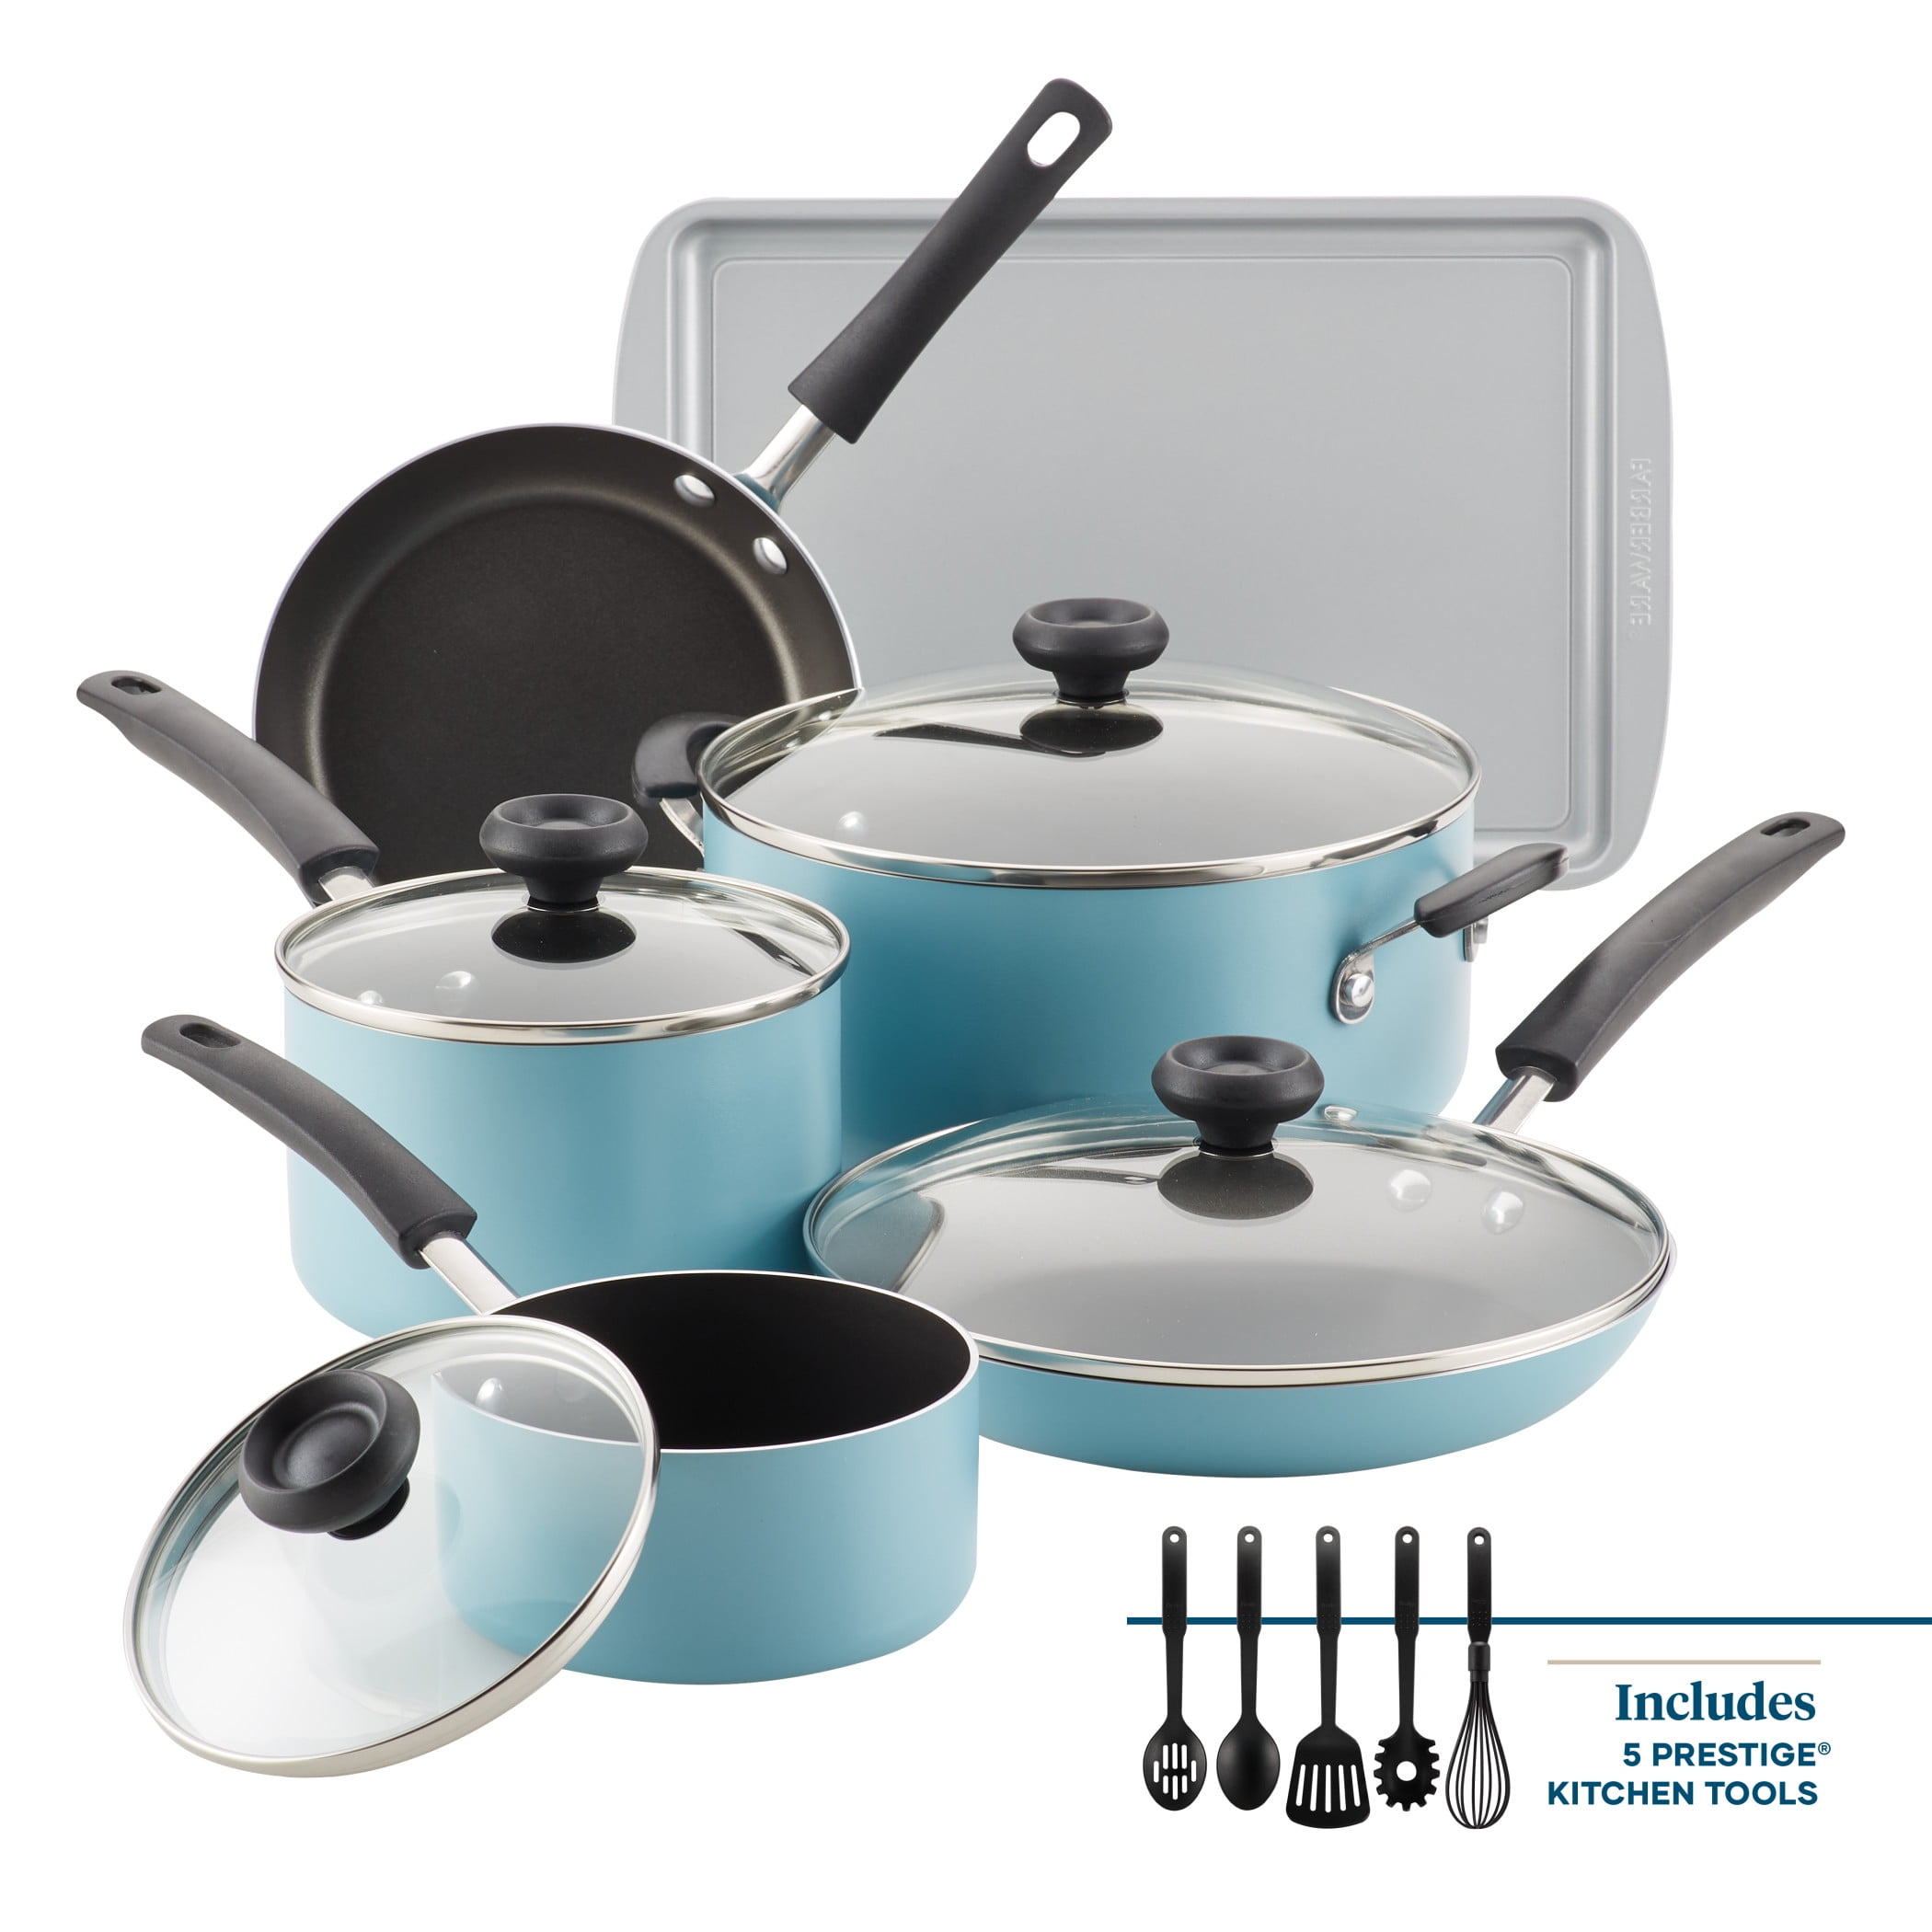 Farberware 12-Piece Easy Clean Nonstick Pots and Pans/Cookware Set Black 